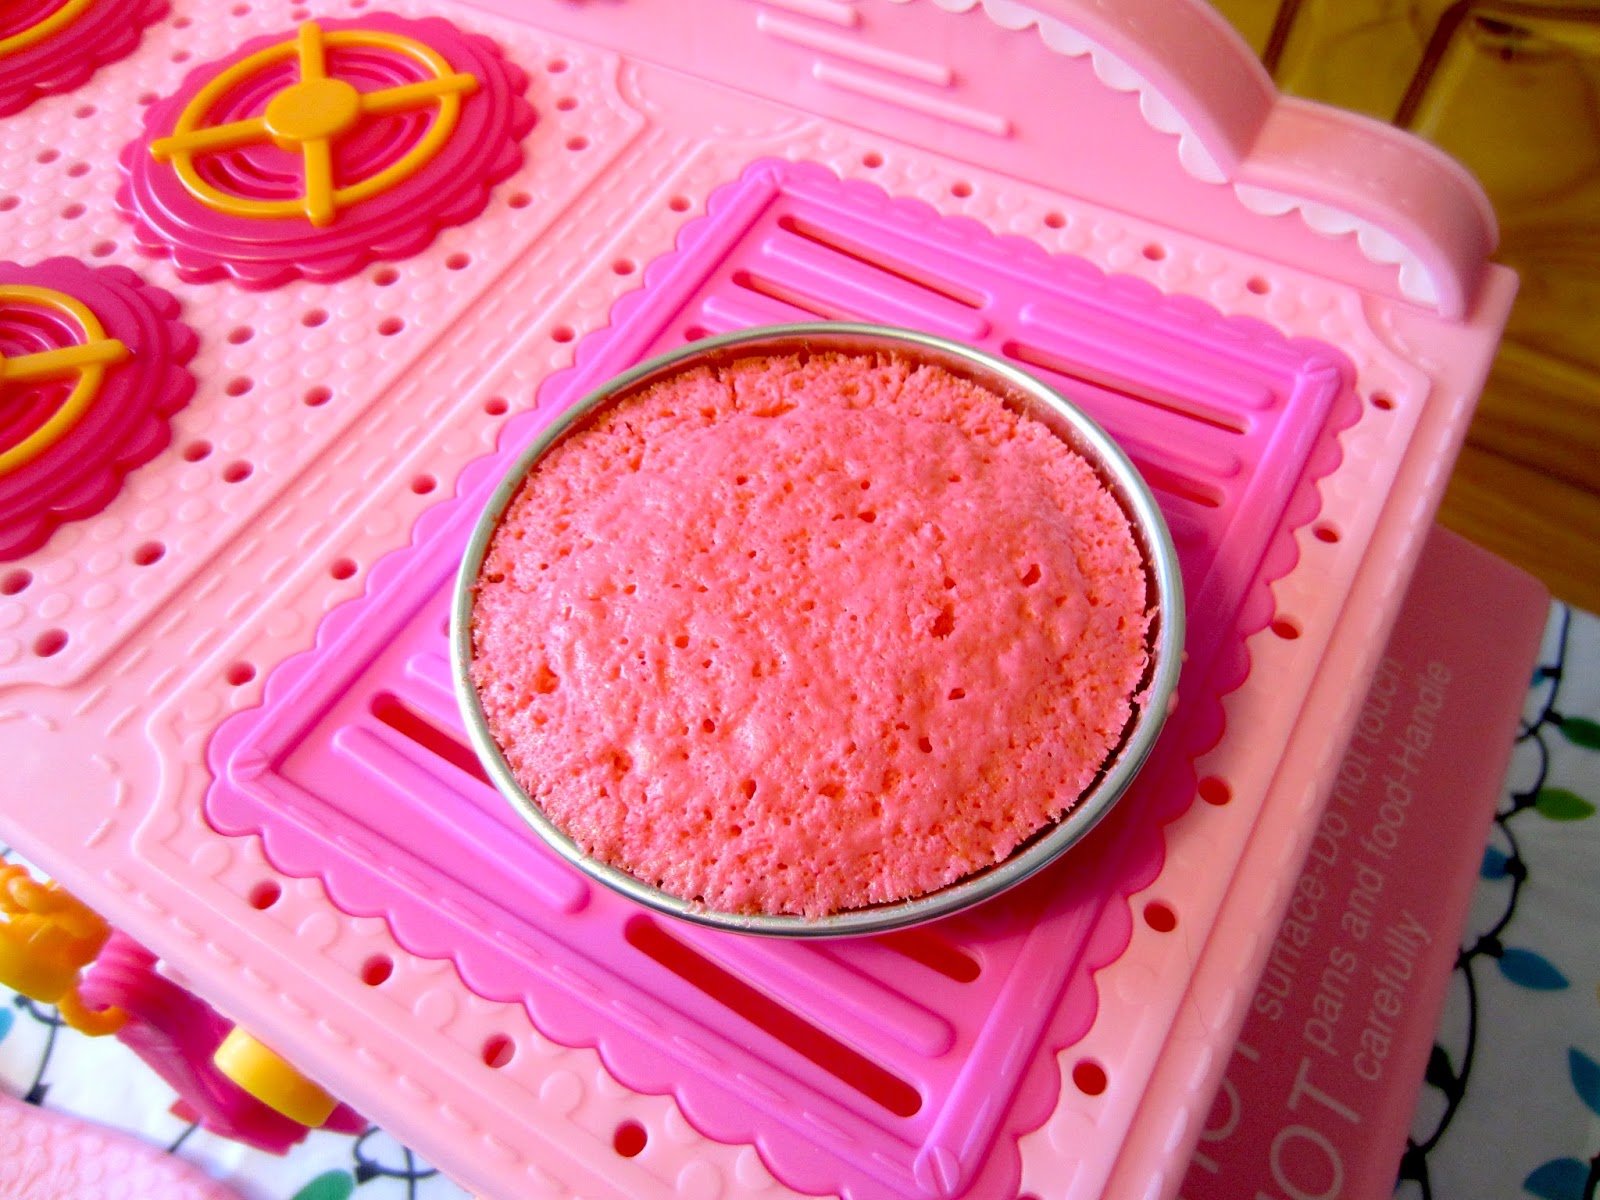 Lalaloopsy Baking Oven - Great Gift for Foodie Kids